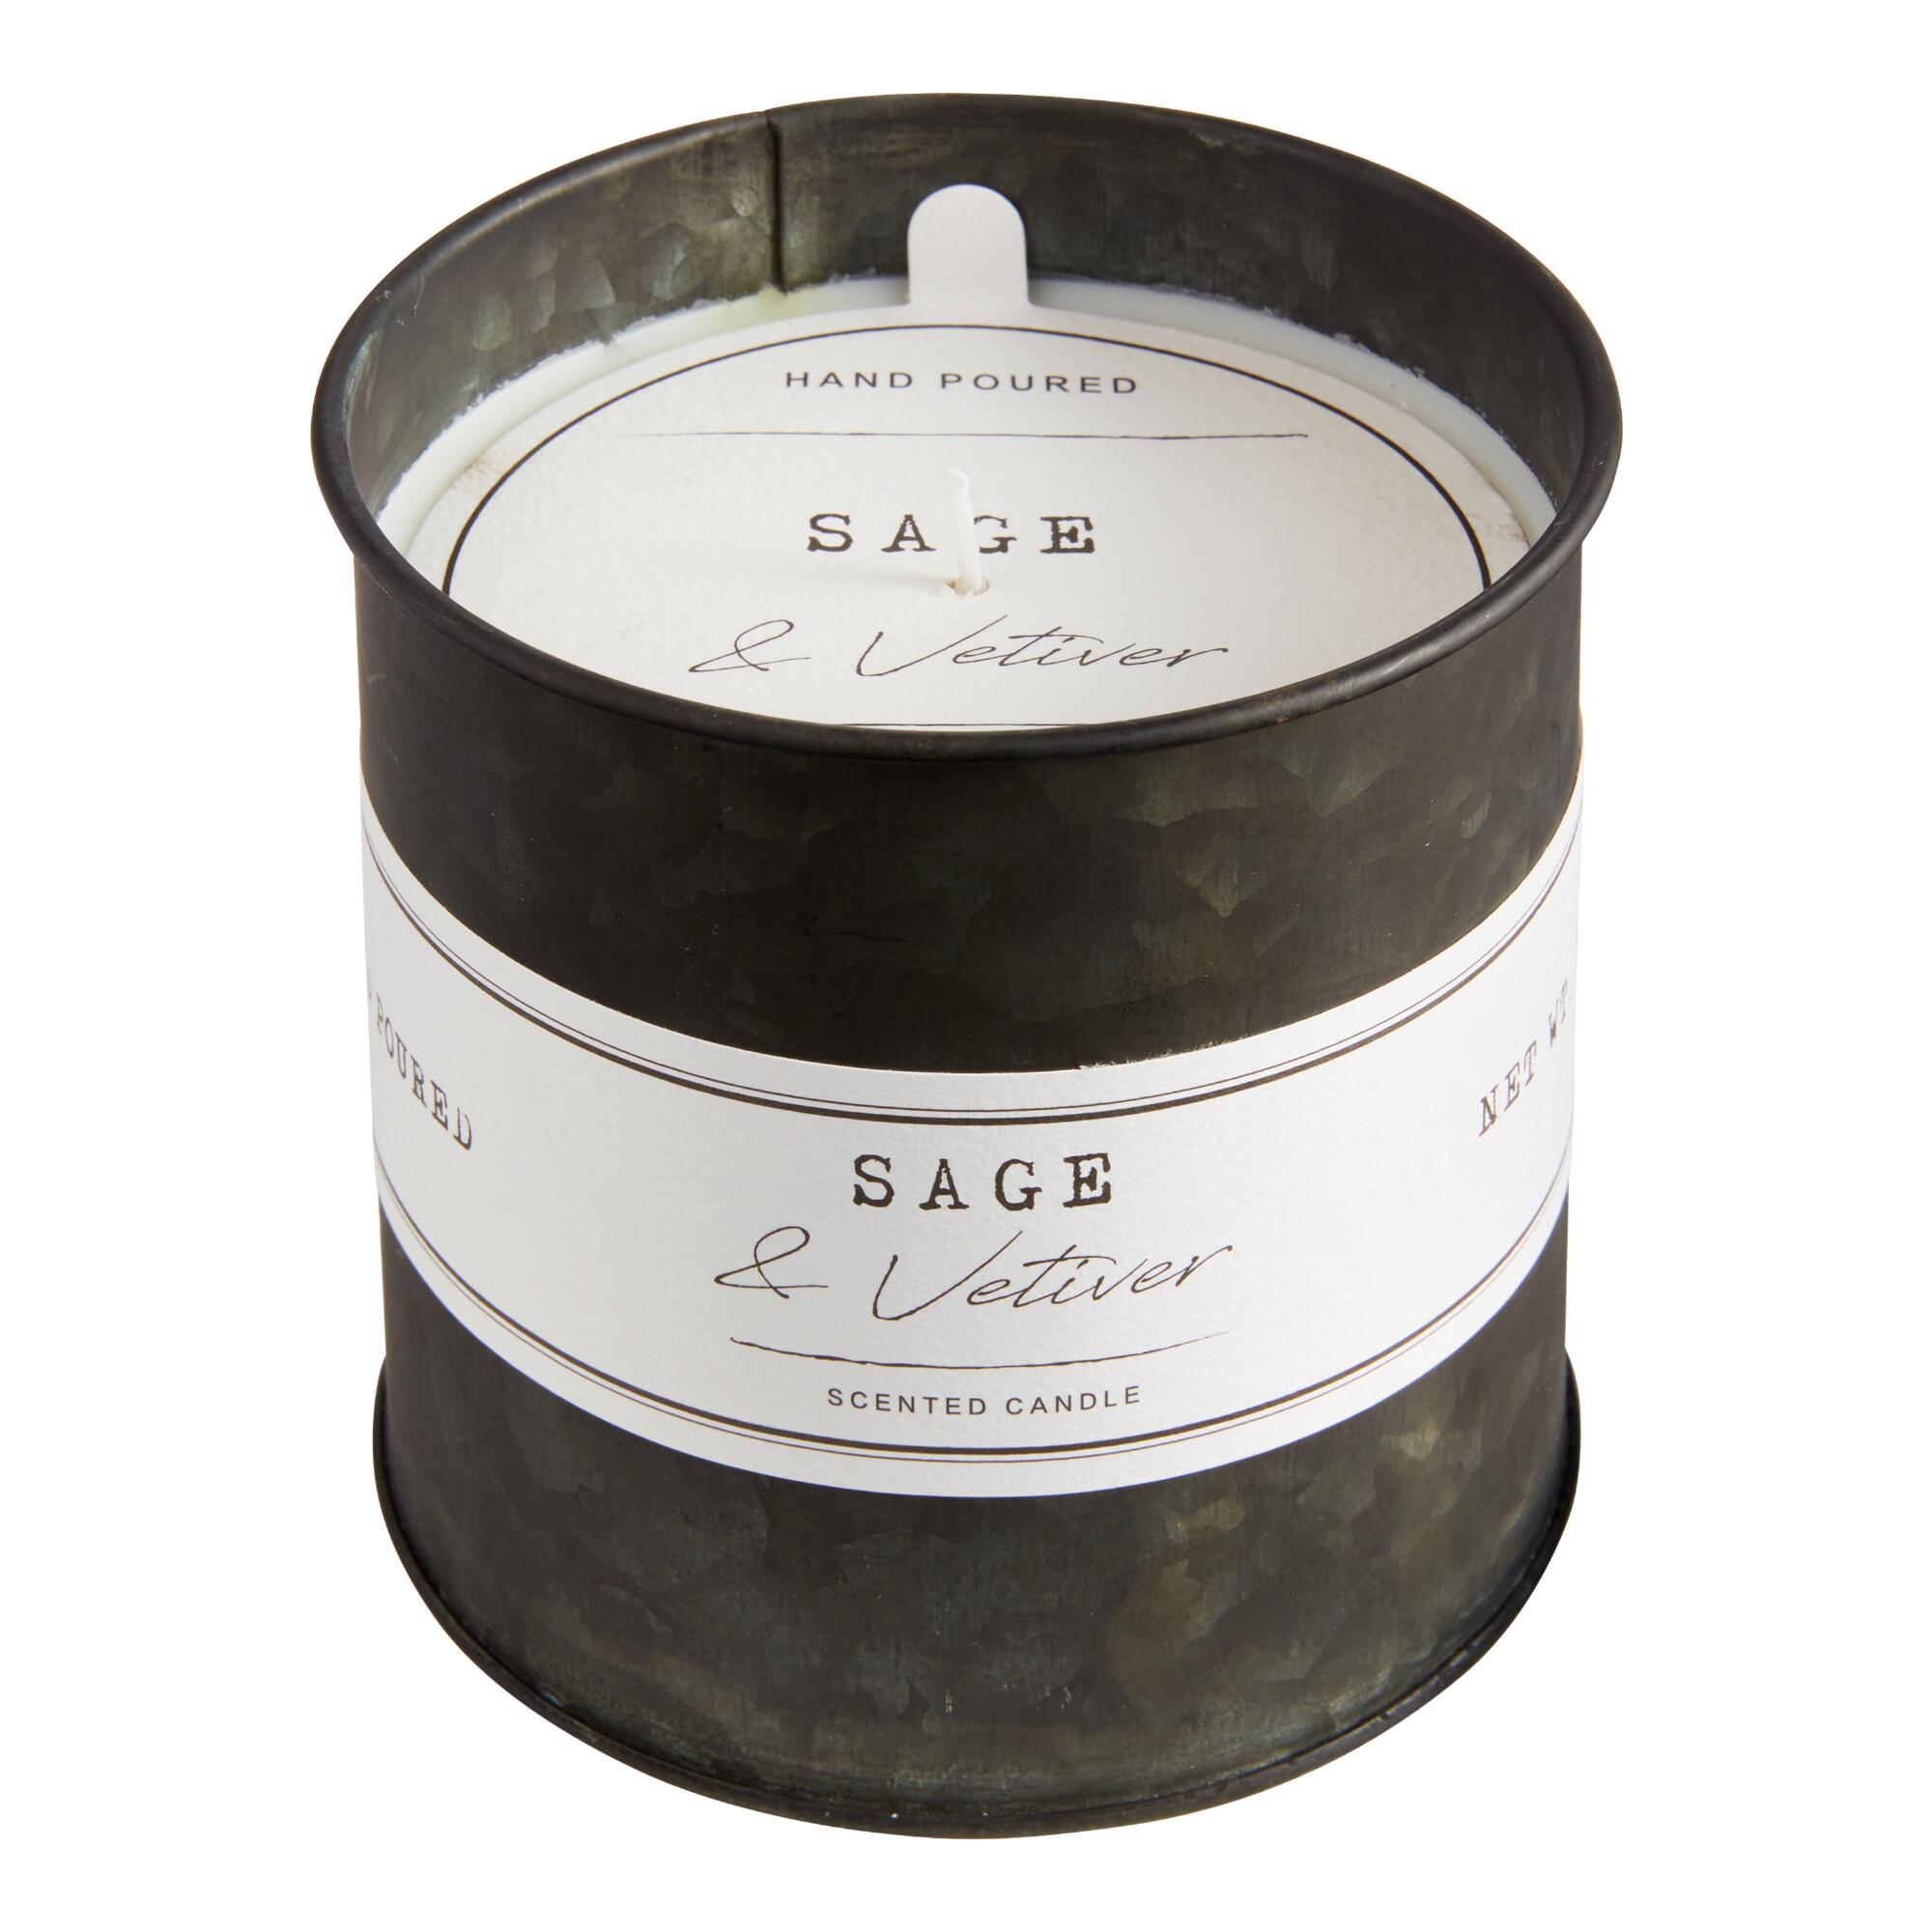 Sage & Vetiver Antique Oil Tin Scented Candle: Black - Wax by World Market